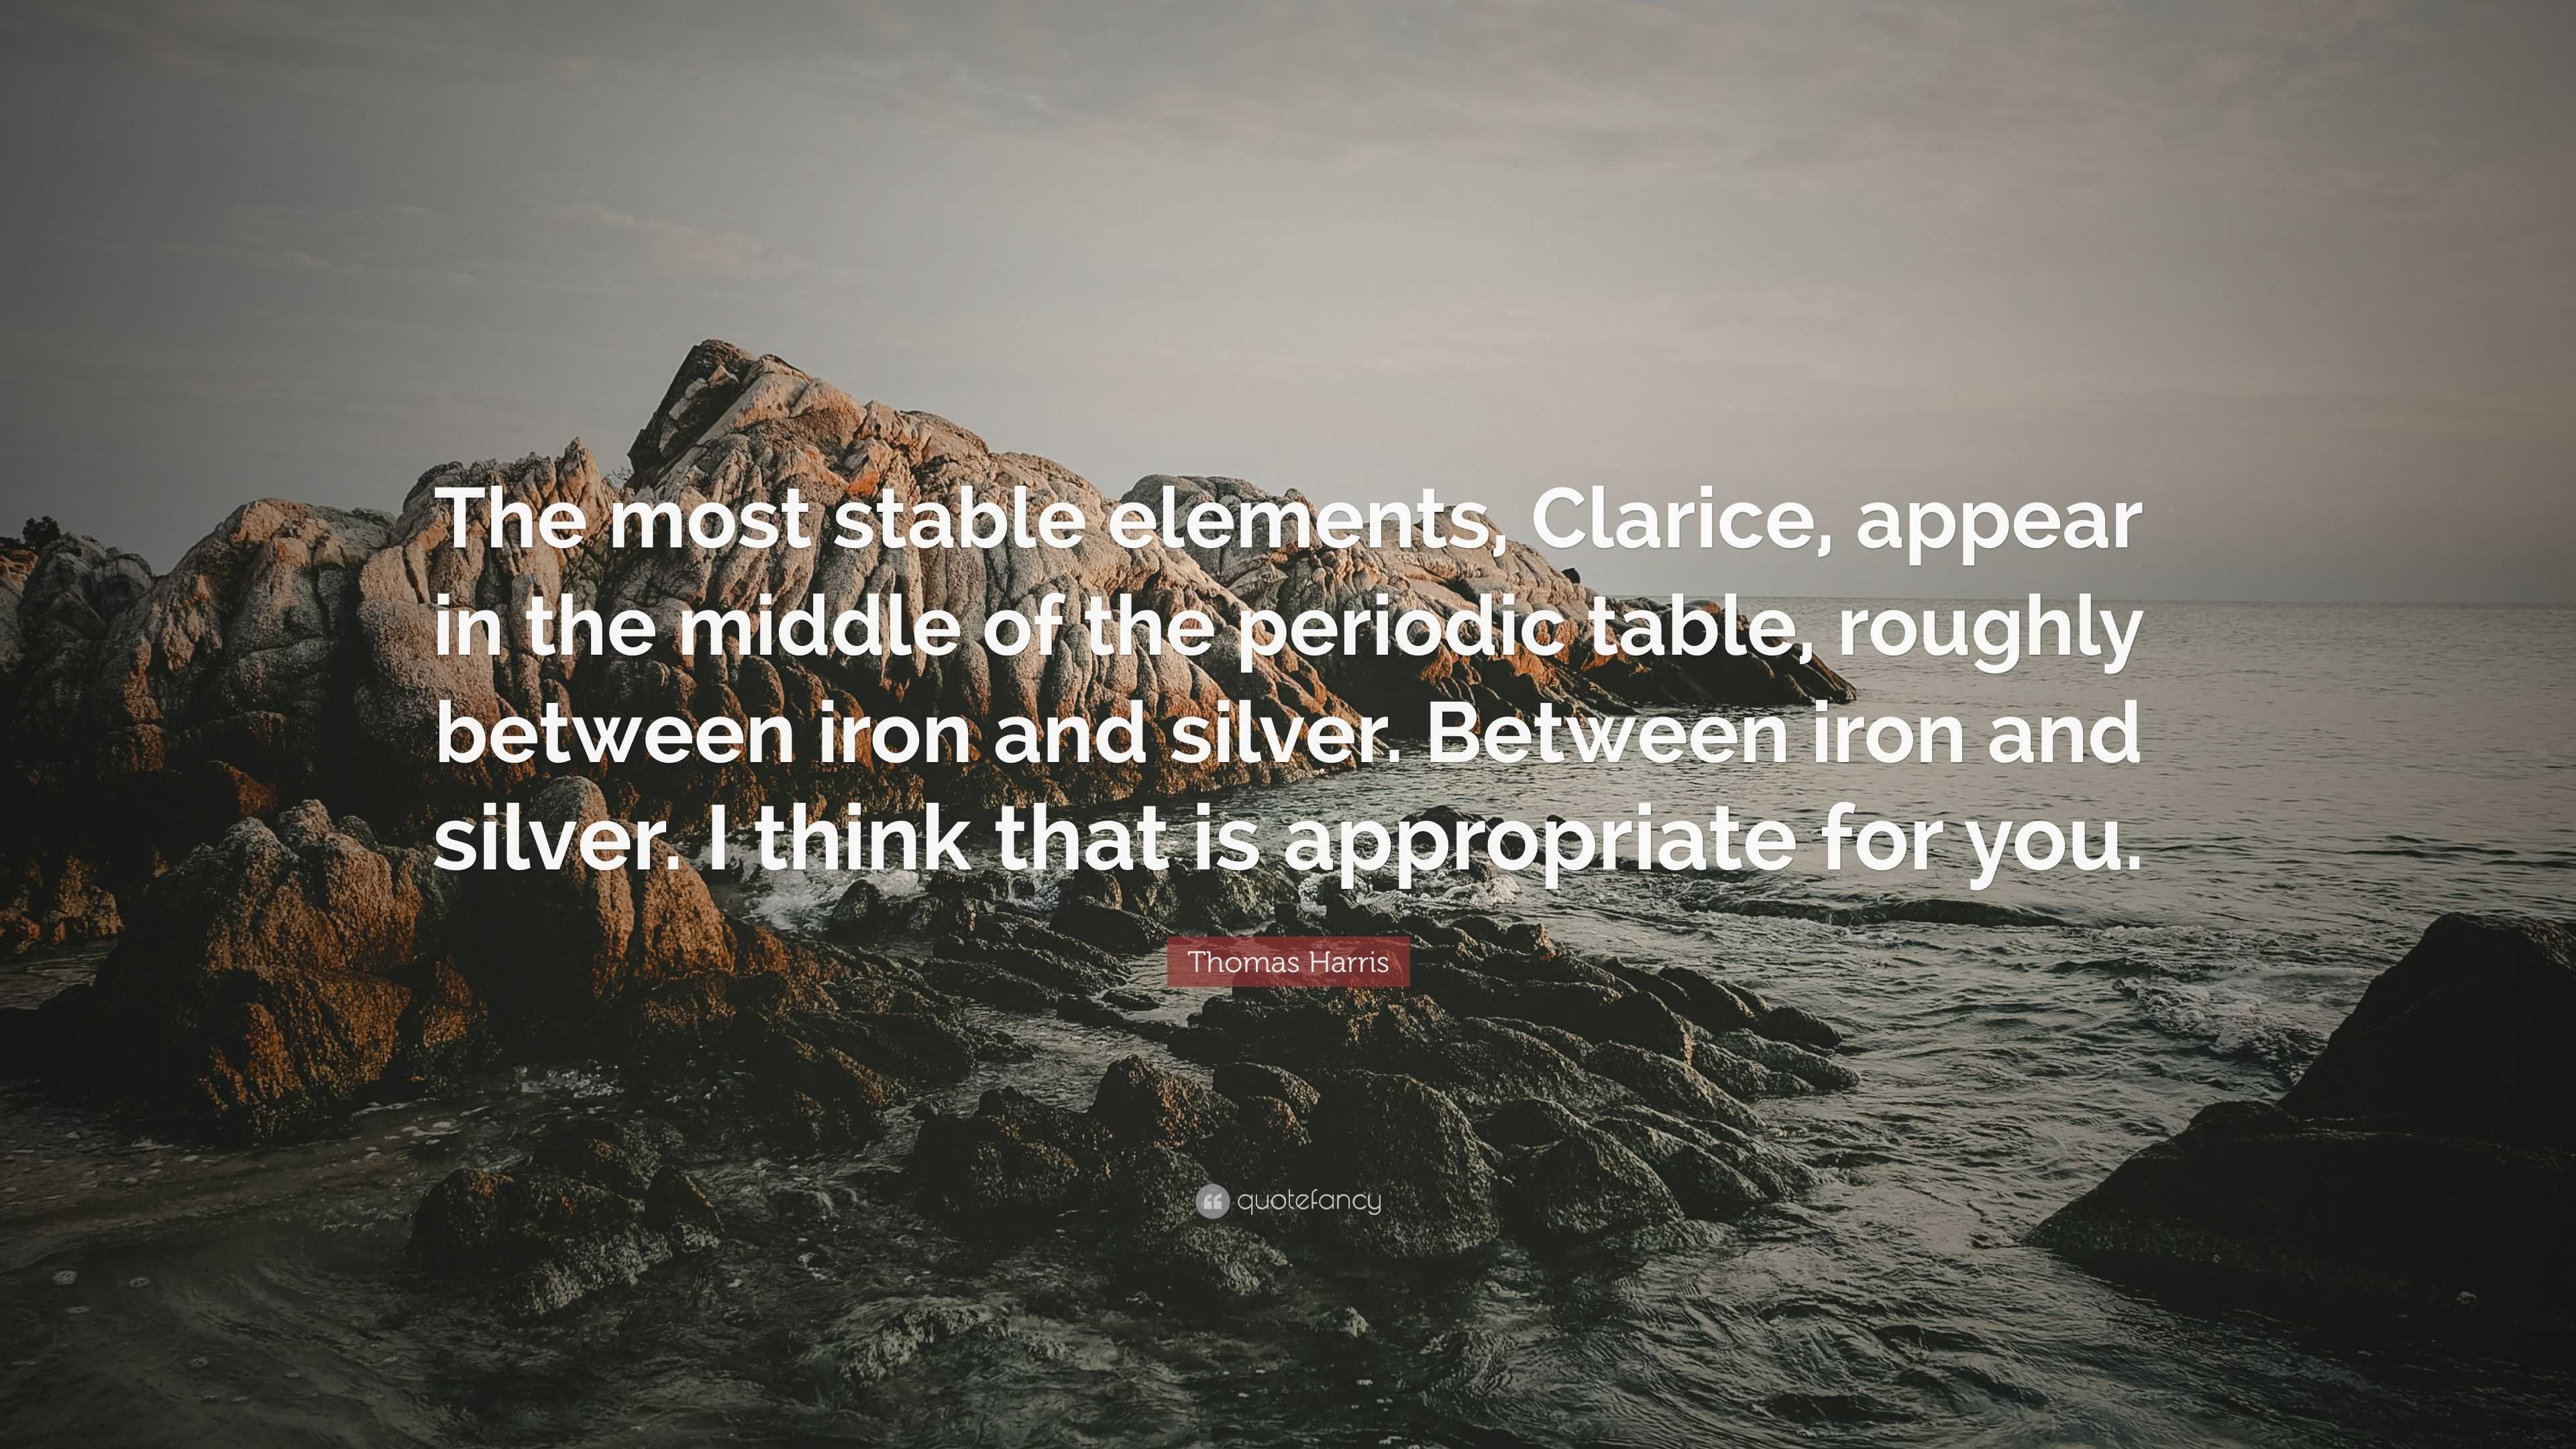 Thomas Harris Quote The Most Stable Elements Clarice Appear In Images, Photos, Reviews